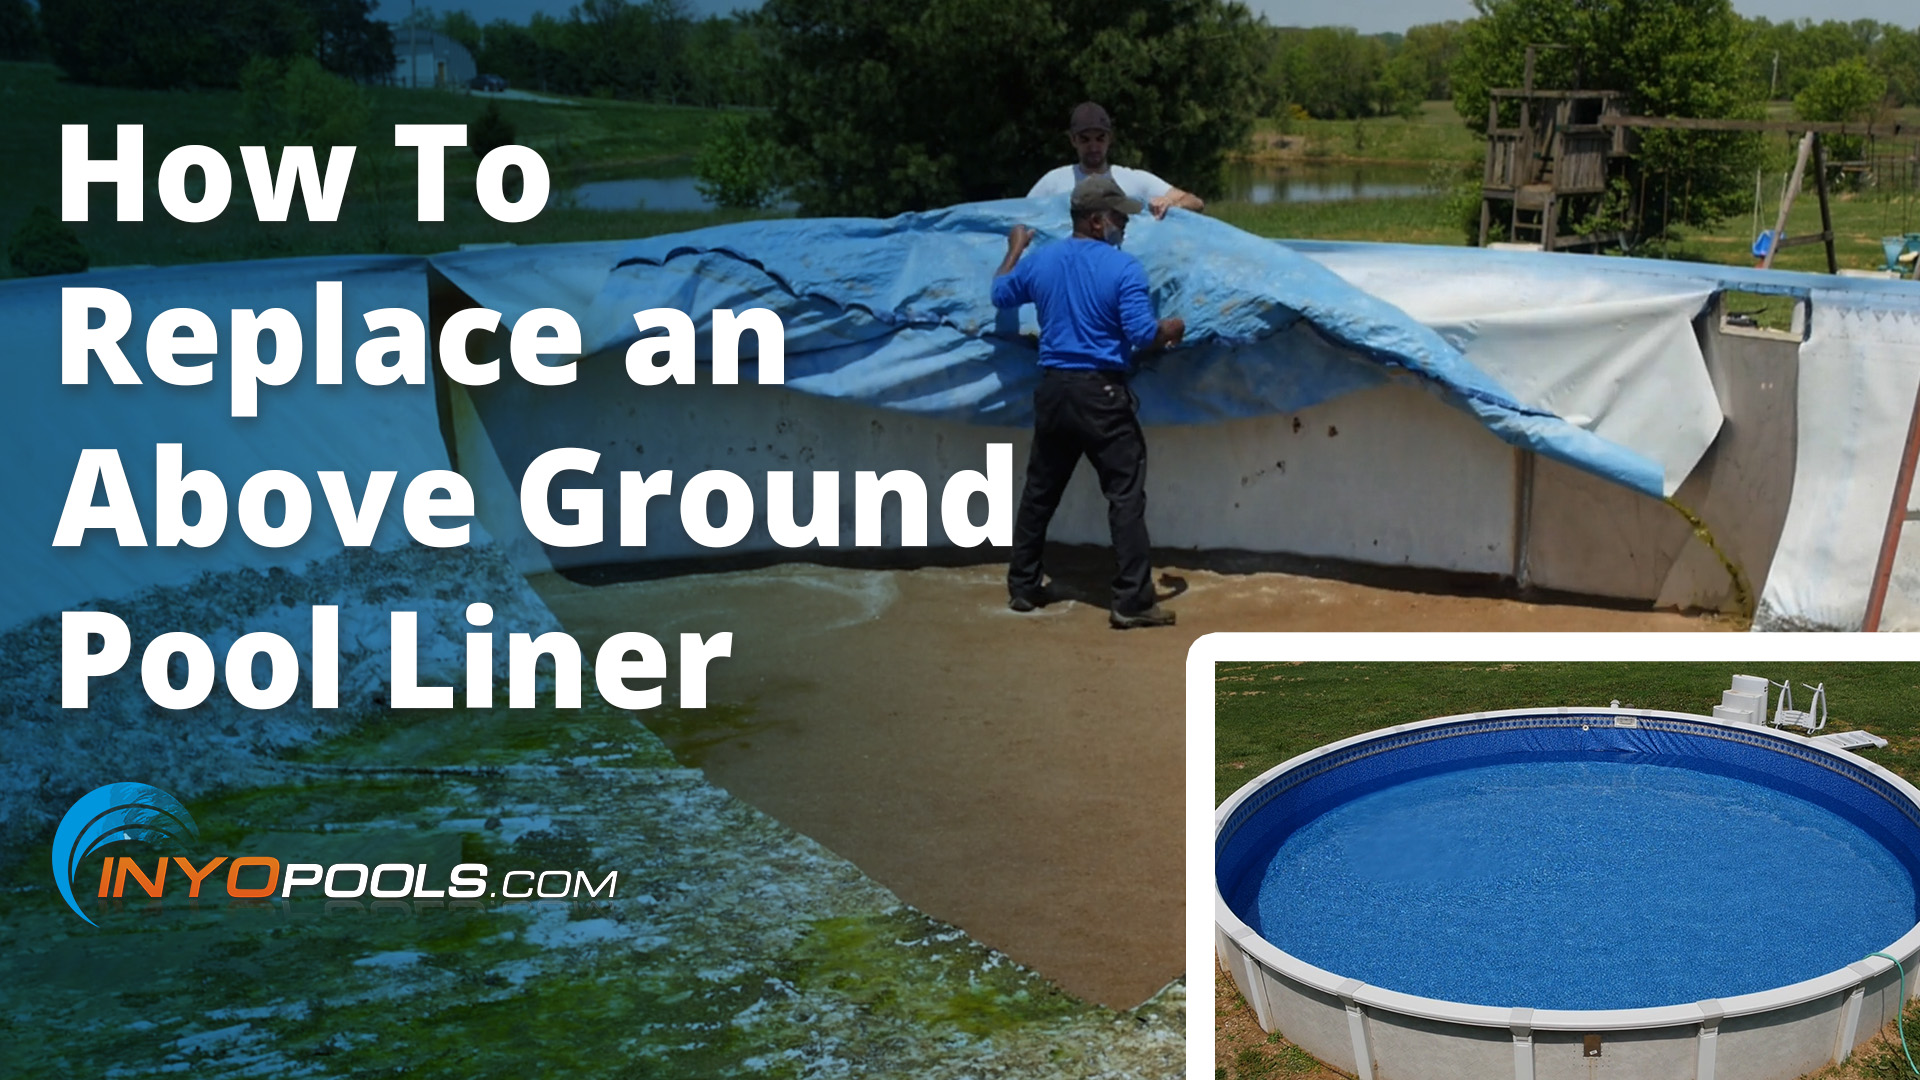 How To Replace an Above Ground Pool Liner - INYOPools.com ...